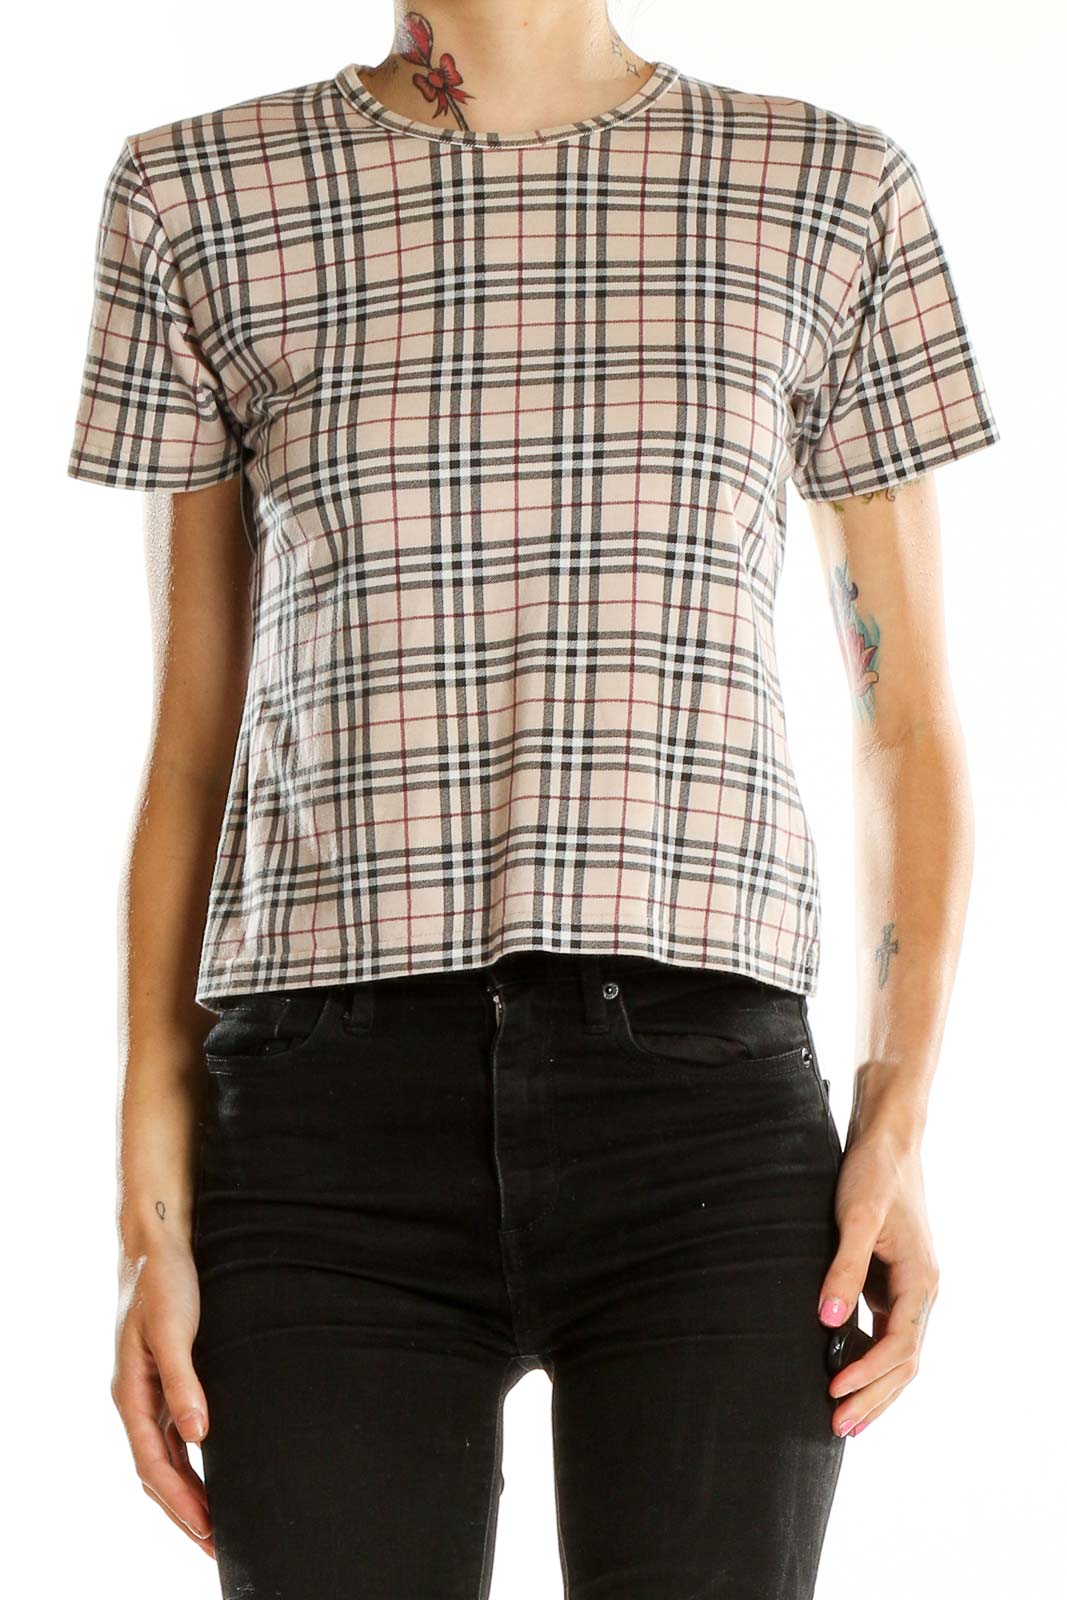 Beige Checkered Top Front